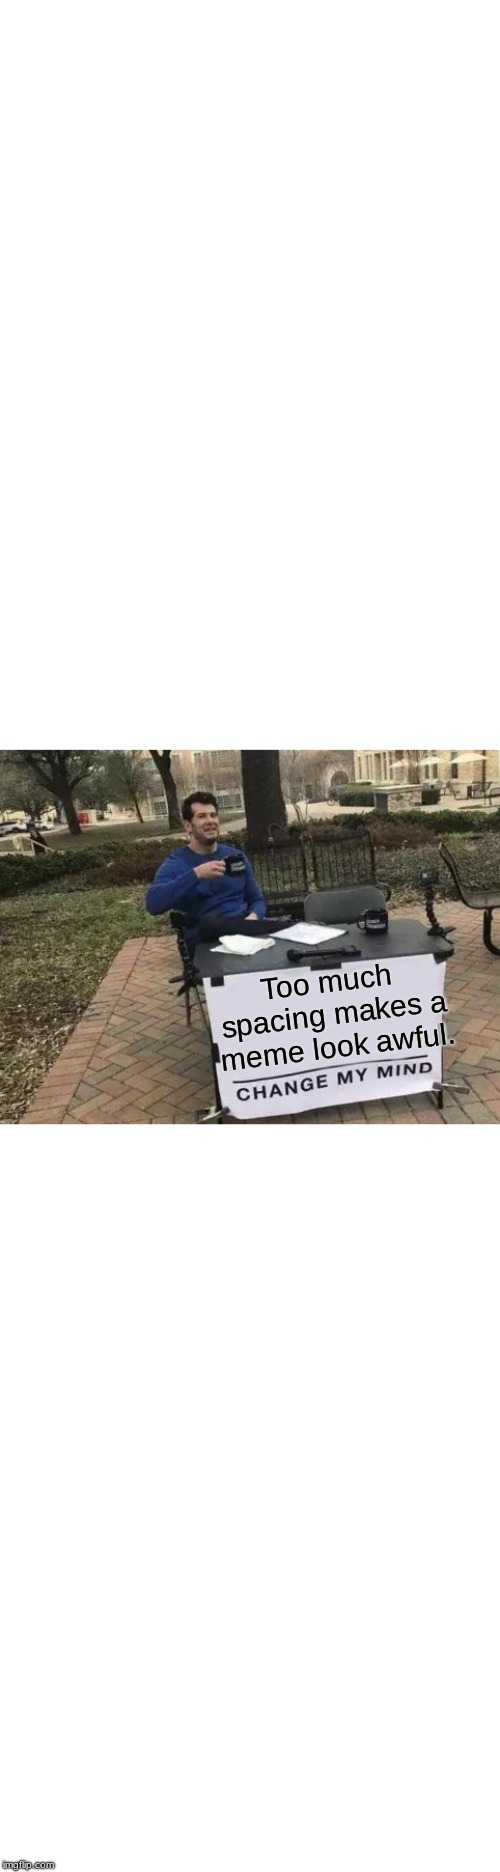 TOO MUCH SPACING | Too much spacing makes a meme look awful. | image tagged in memes,change my mind,too much spacing,oops,this is real,please don't just keep scrolling | made w/ Imgflip meme maker